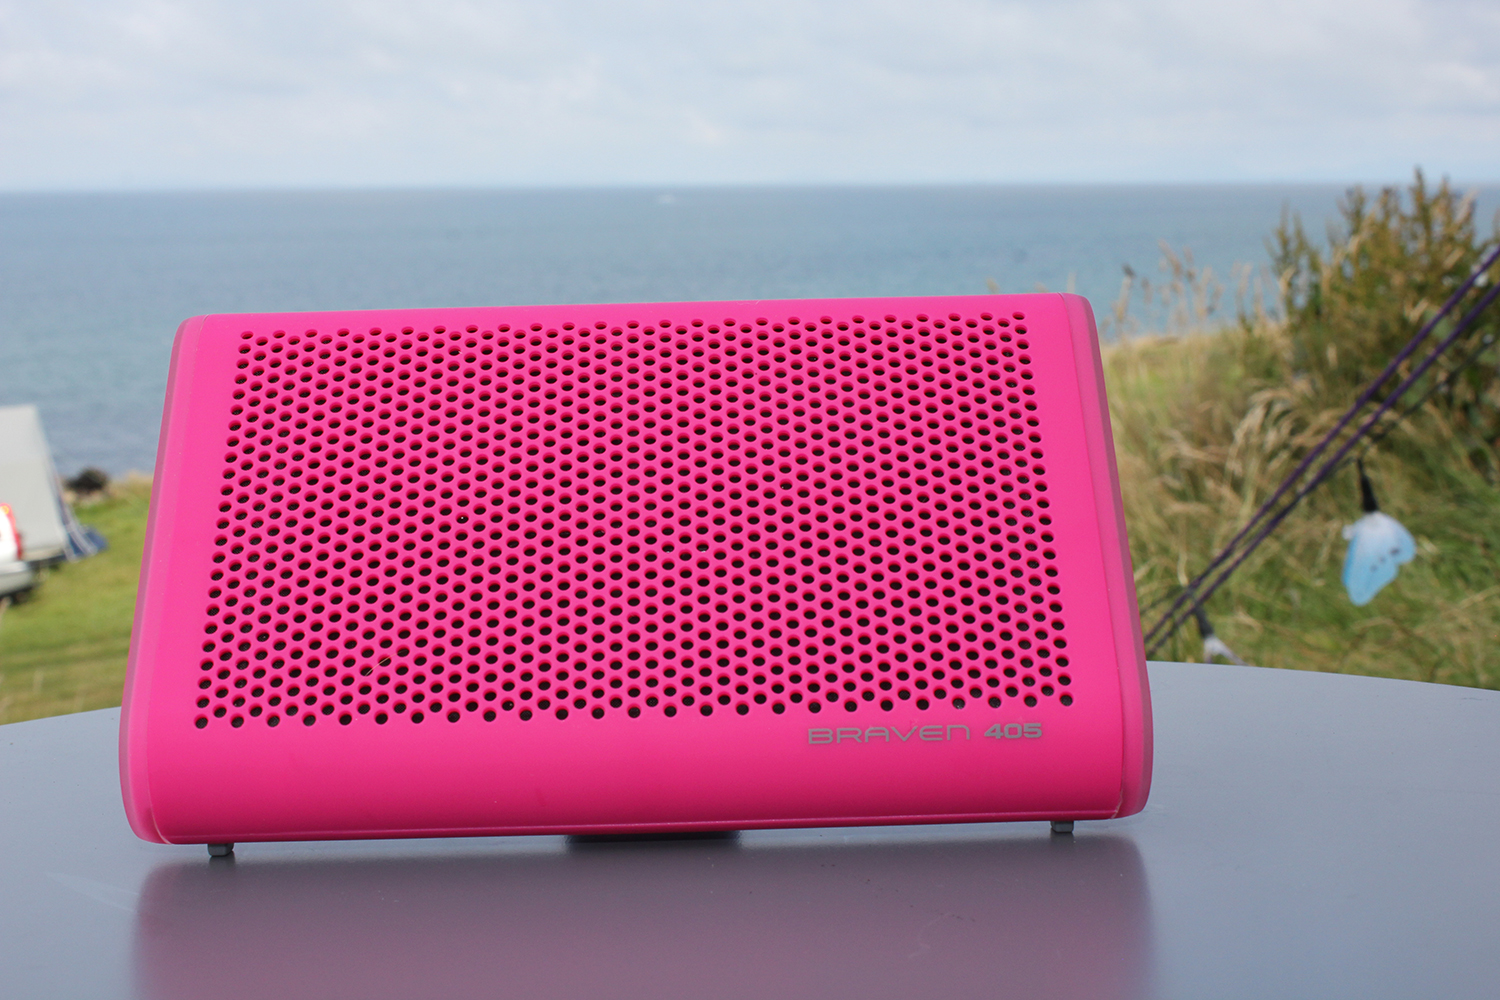 https://www.campingwithstyle.co.uk/wp-content/uploads/2017/06/braven-405-speaker-review07.jpg